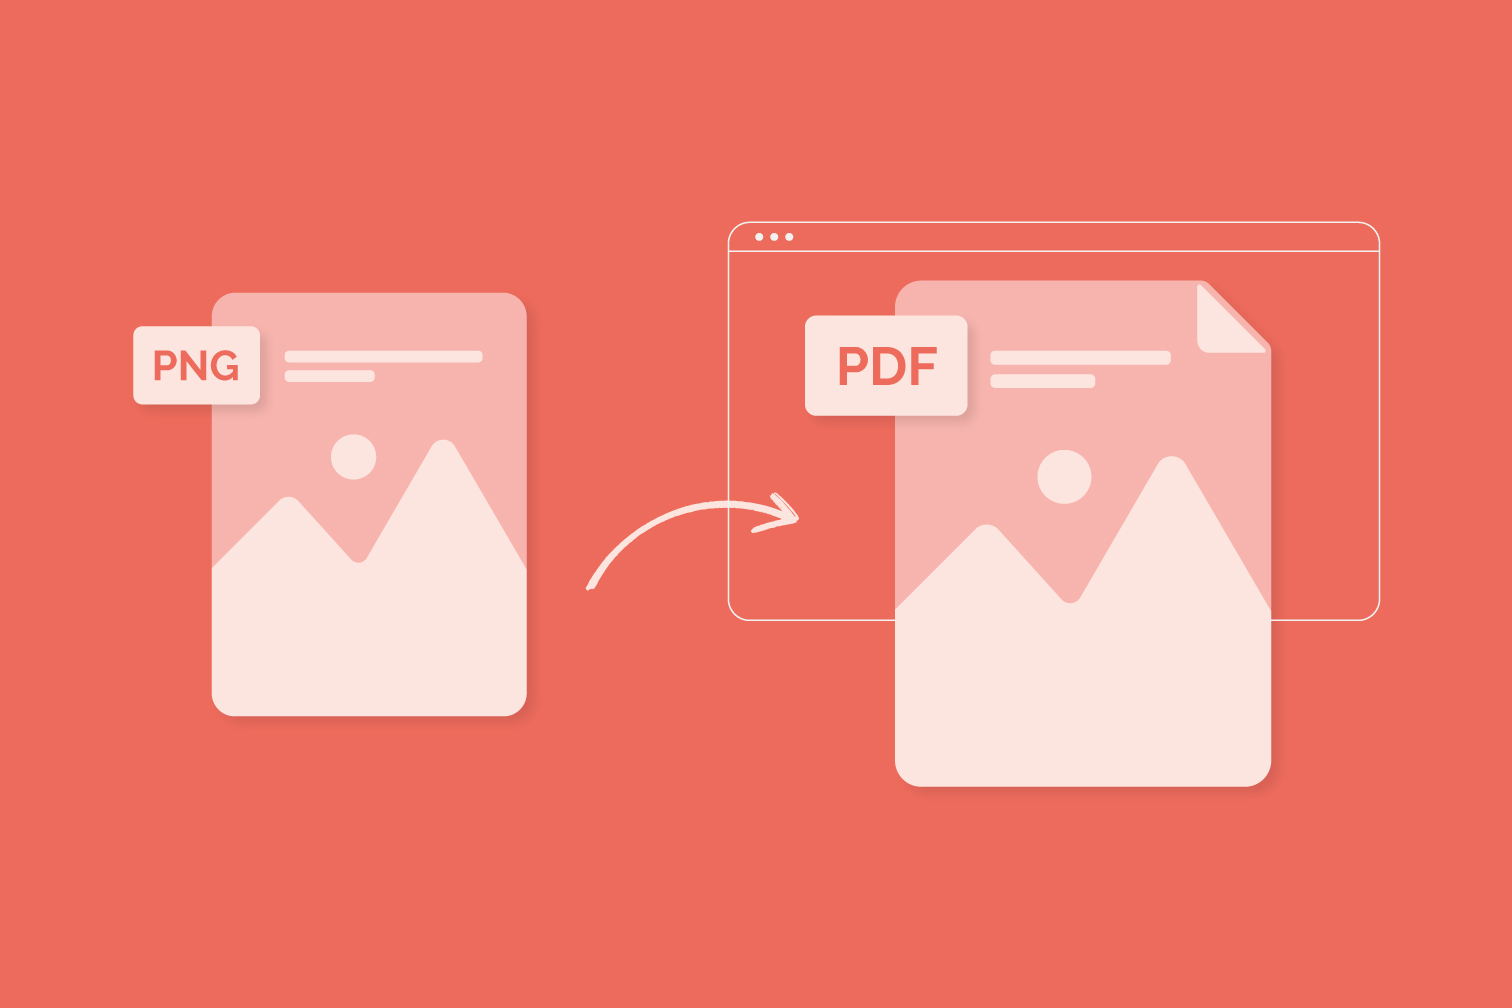 How to convert PNG images to PDF files online